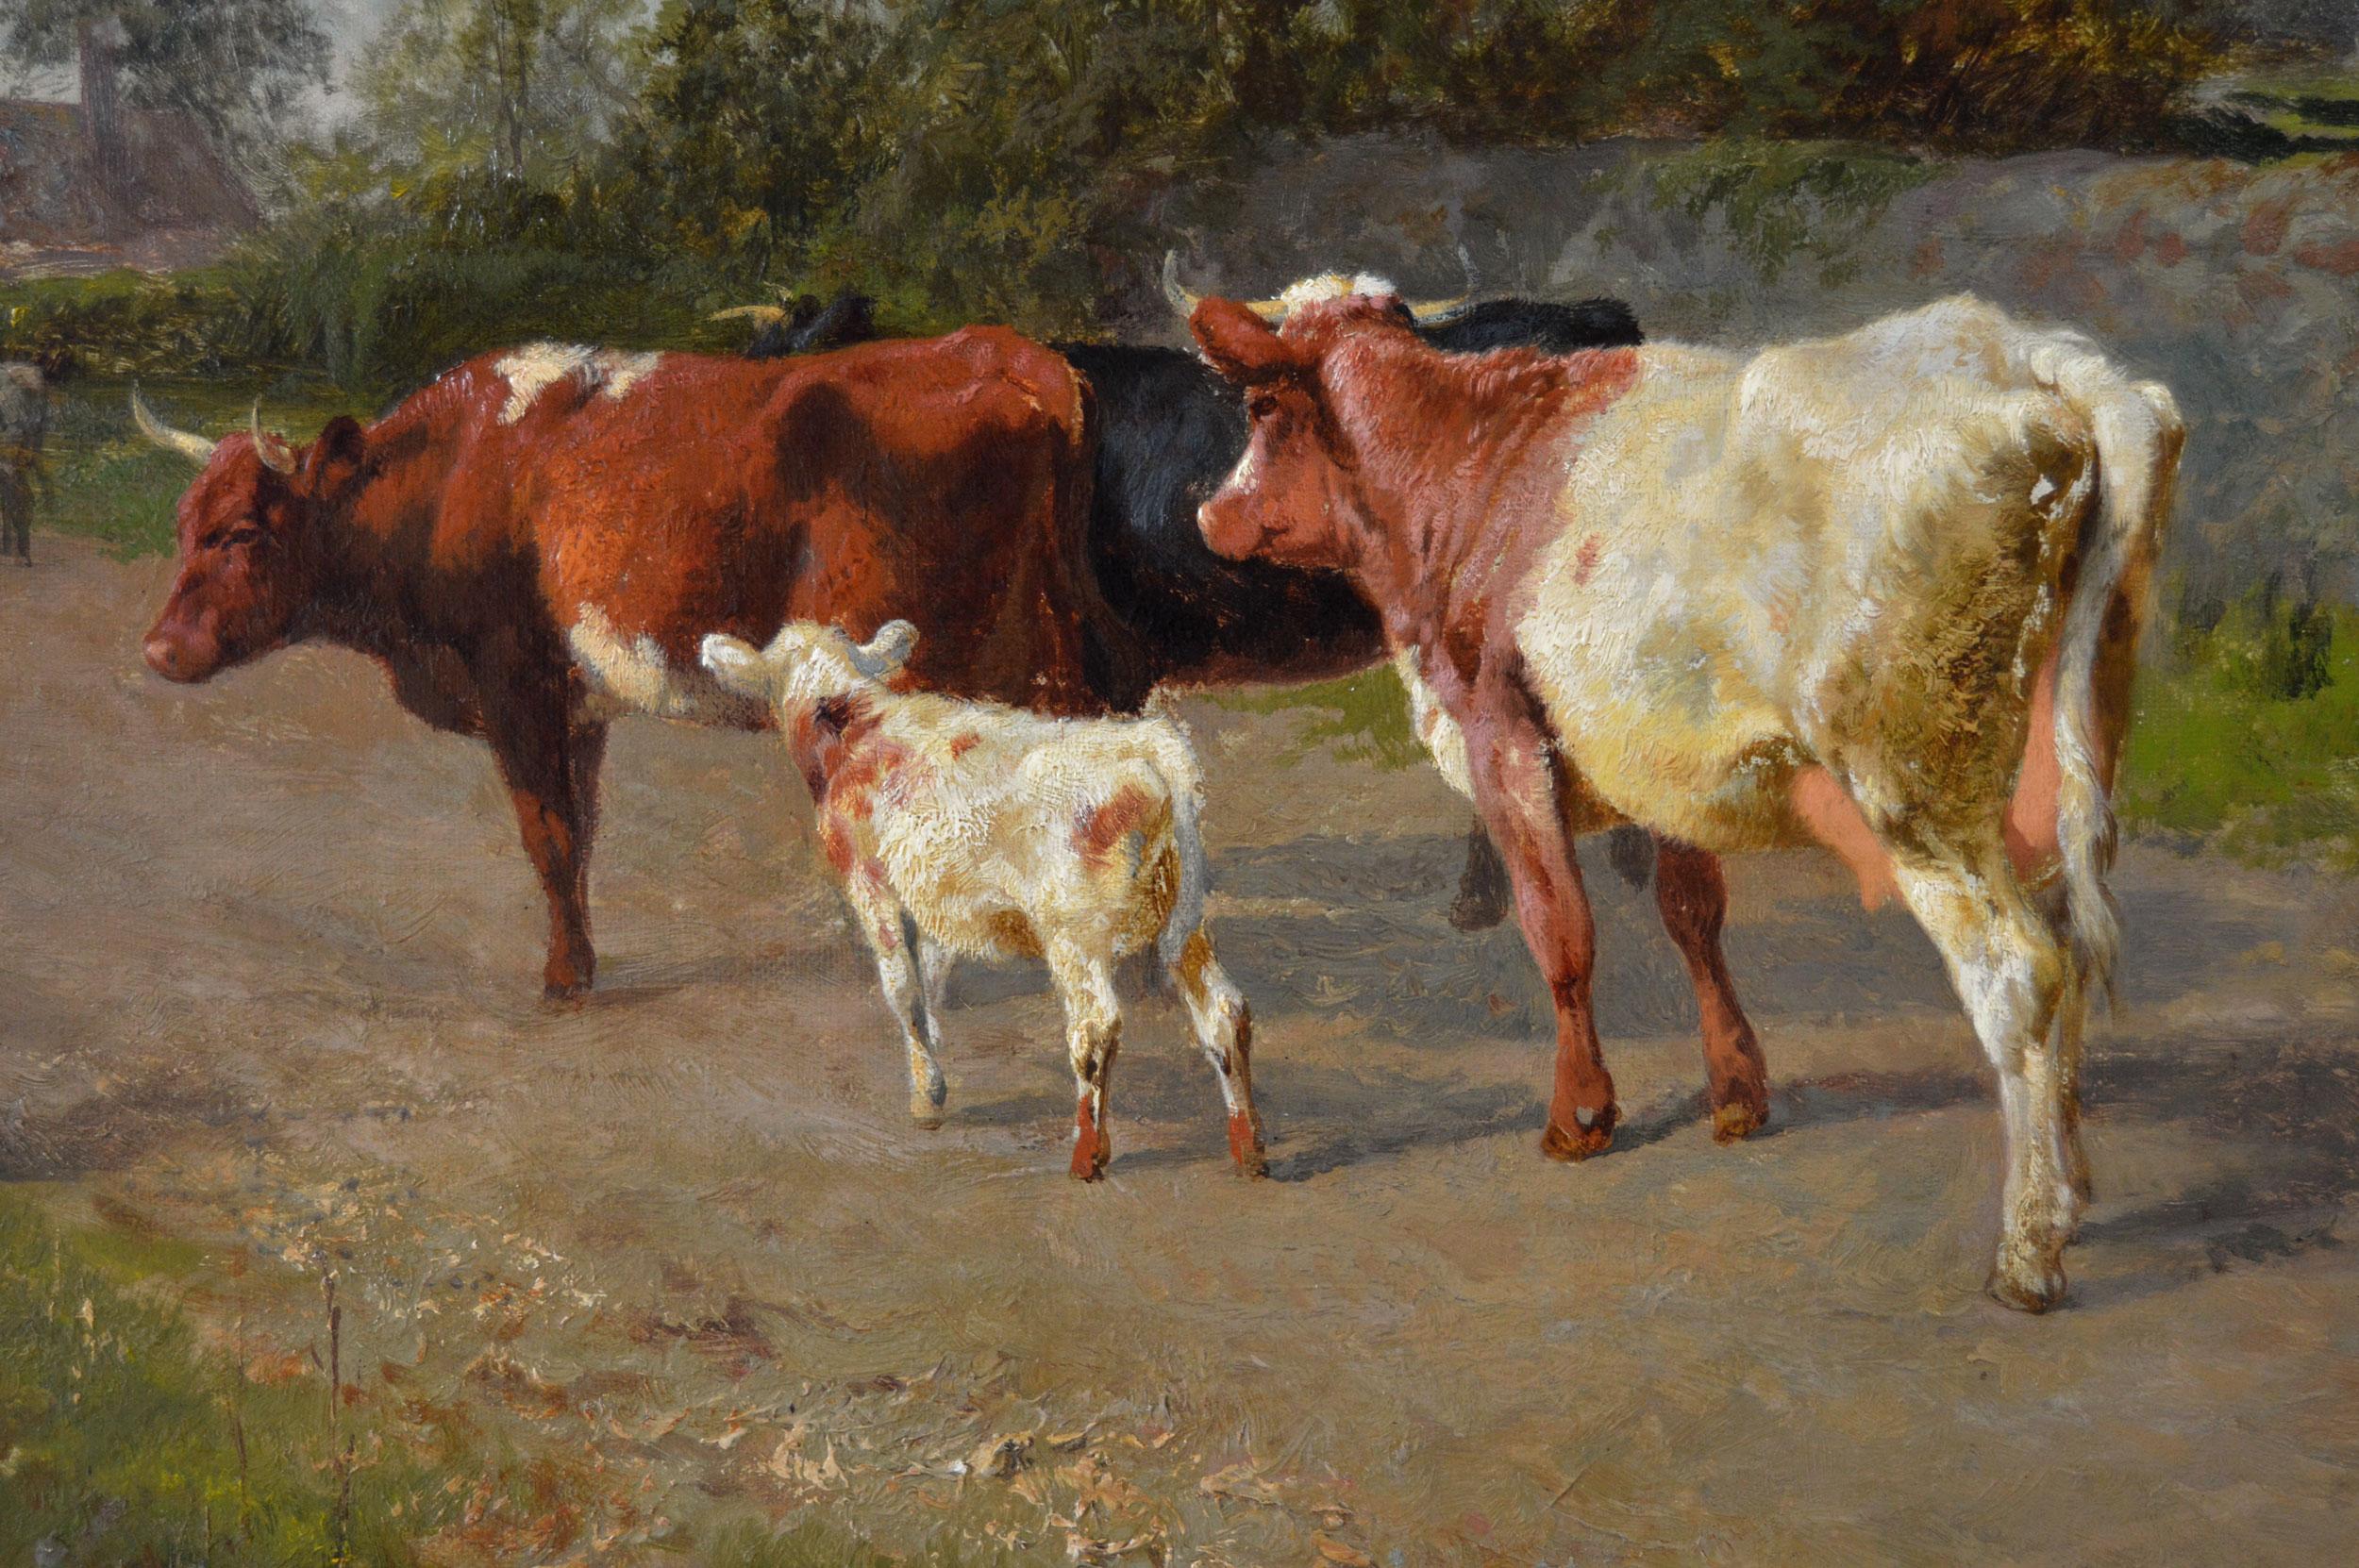 19th Century landscape oil painting of cattle in a lane - Brown Figurative Painting by Charles Collins